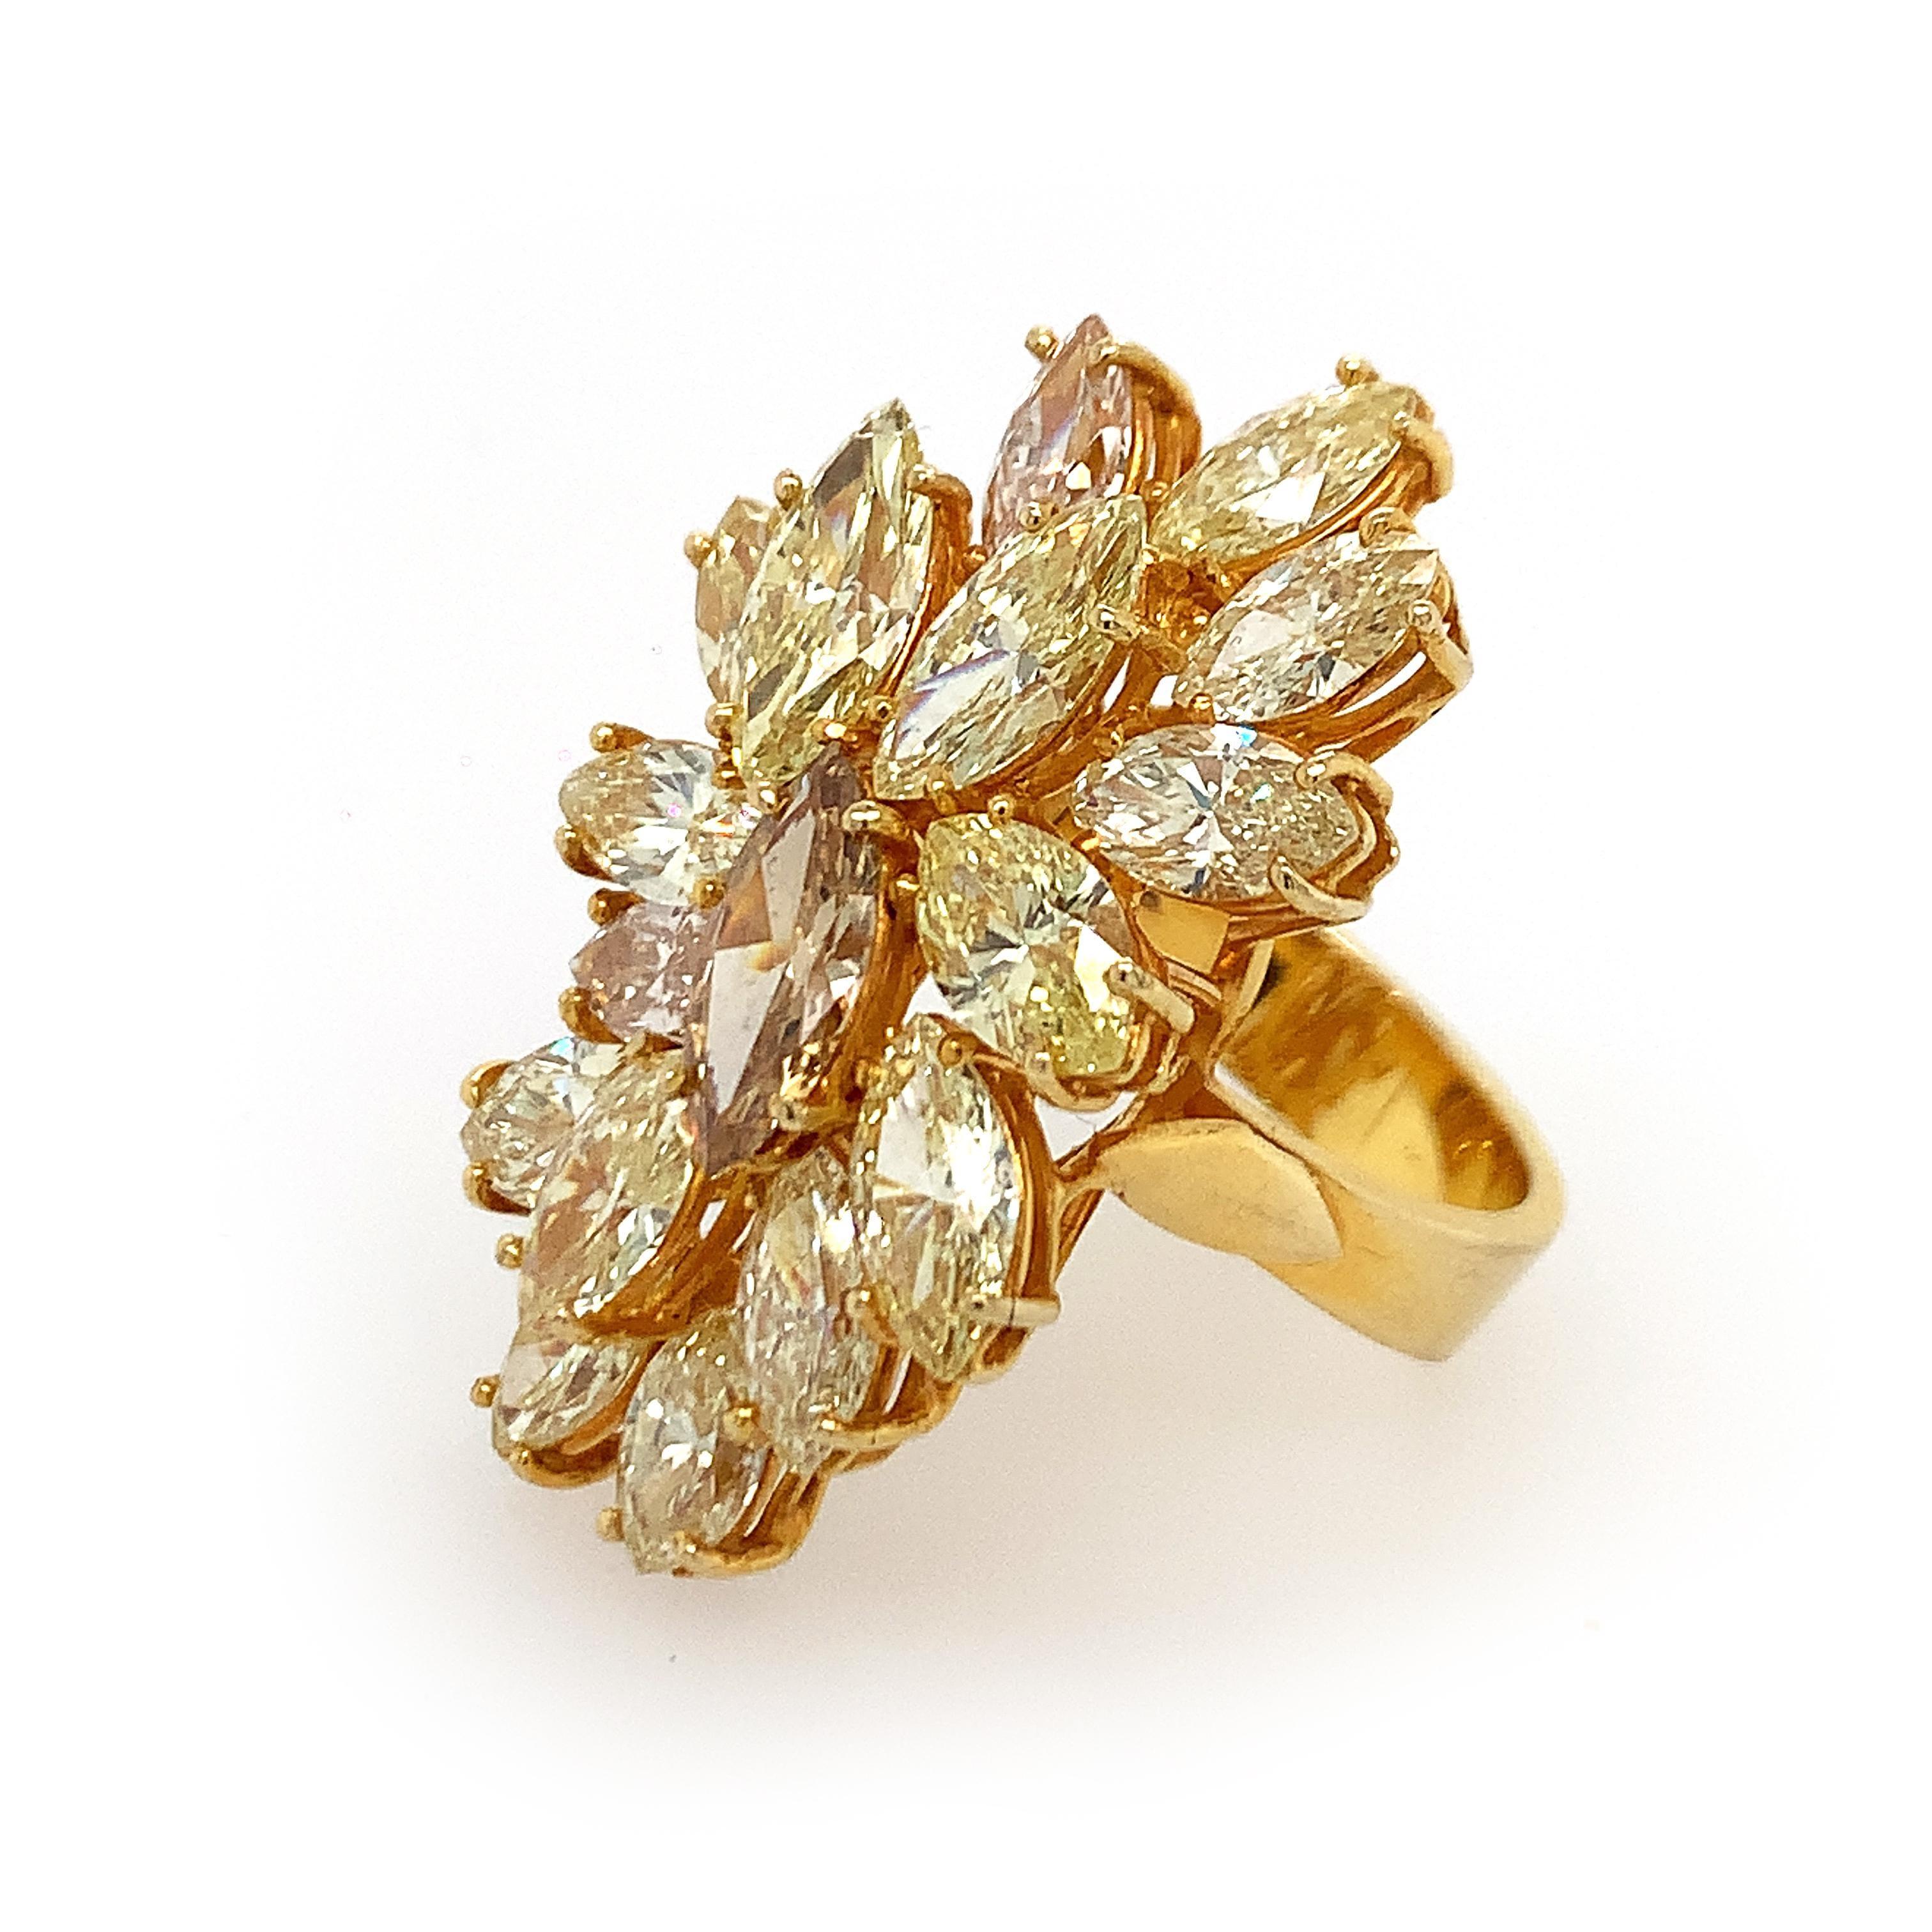 18K Y/gold yellow diamond ring, 17 marquise diamonds with three certified. One weights 1.03 ct natural fancy yellow with SI2 clarity, GIA Certificate #6213209619,one weights 0.84 ct natural Fancy Brown-Yellow with VS2 clarity GIA certificate #